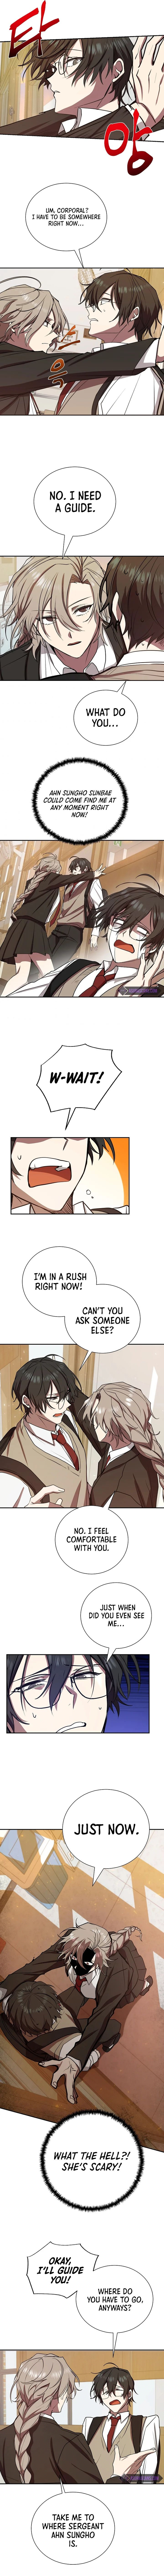 My School Life Pretending To Be a Worthless Person Chapter 8 - Page 5